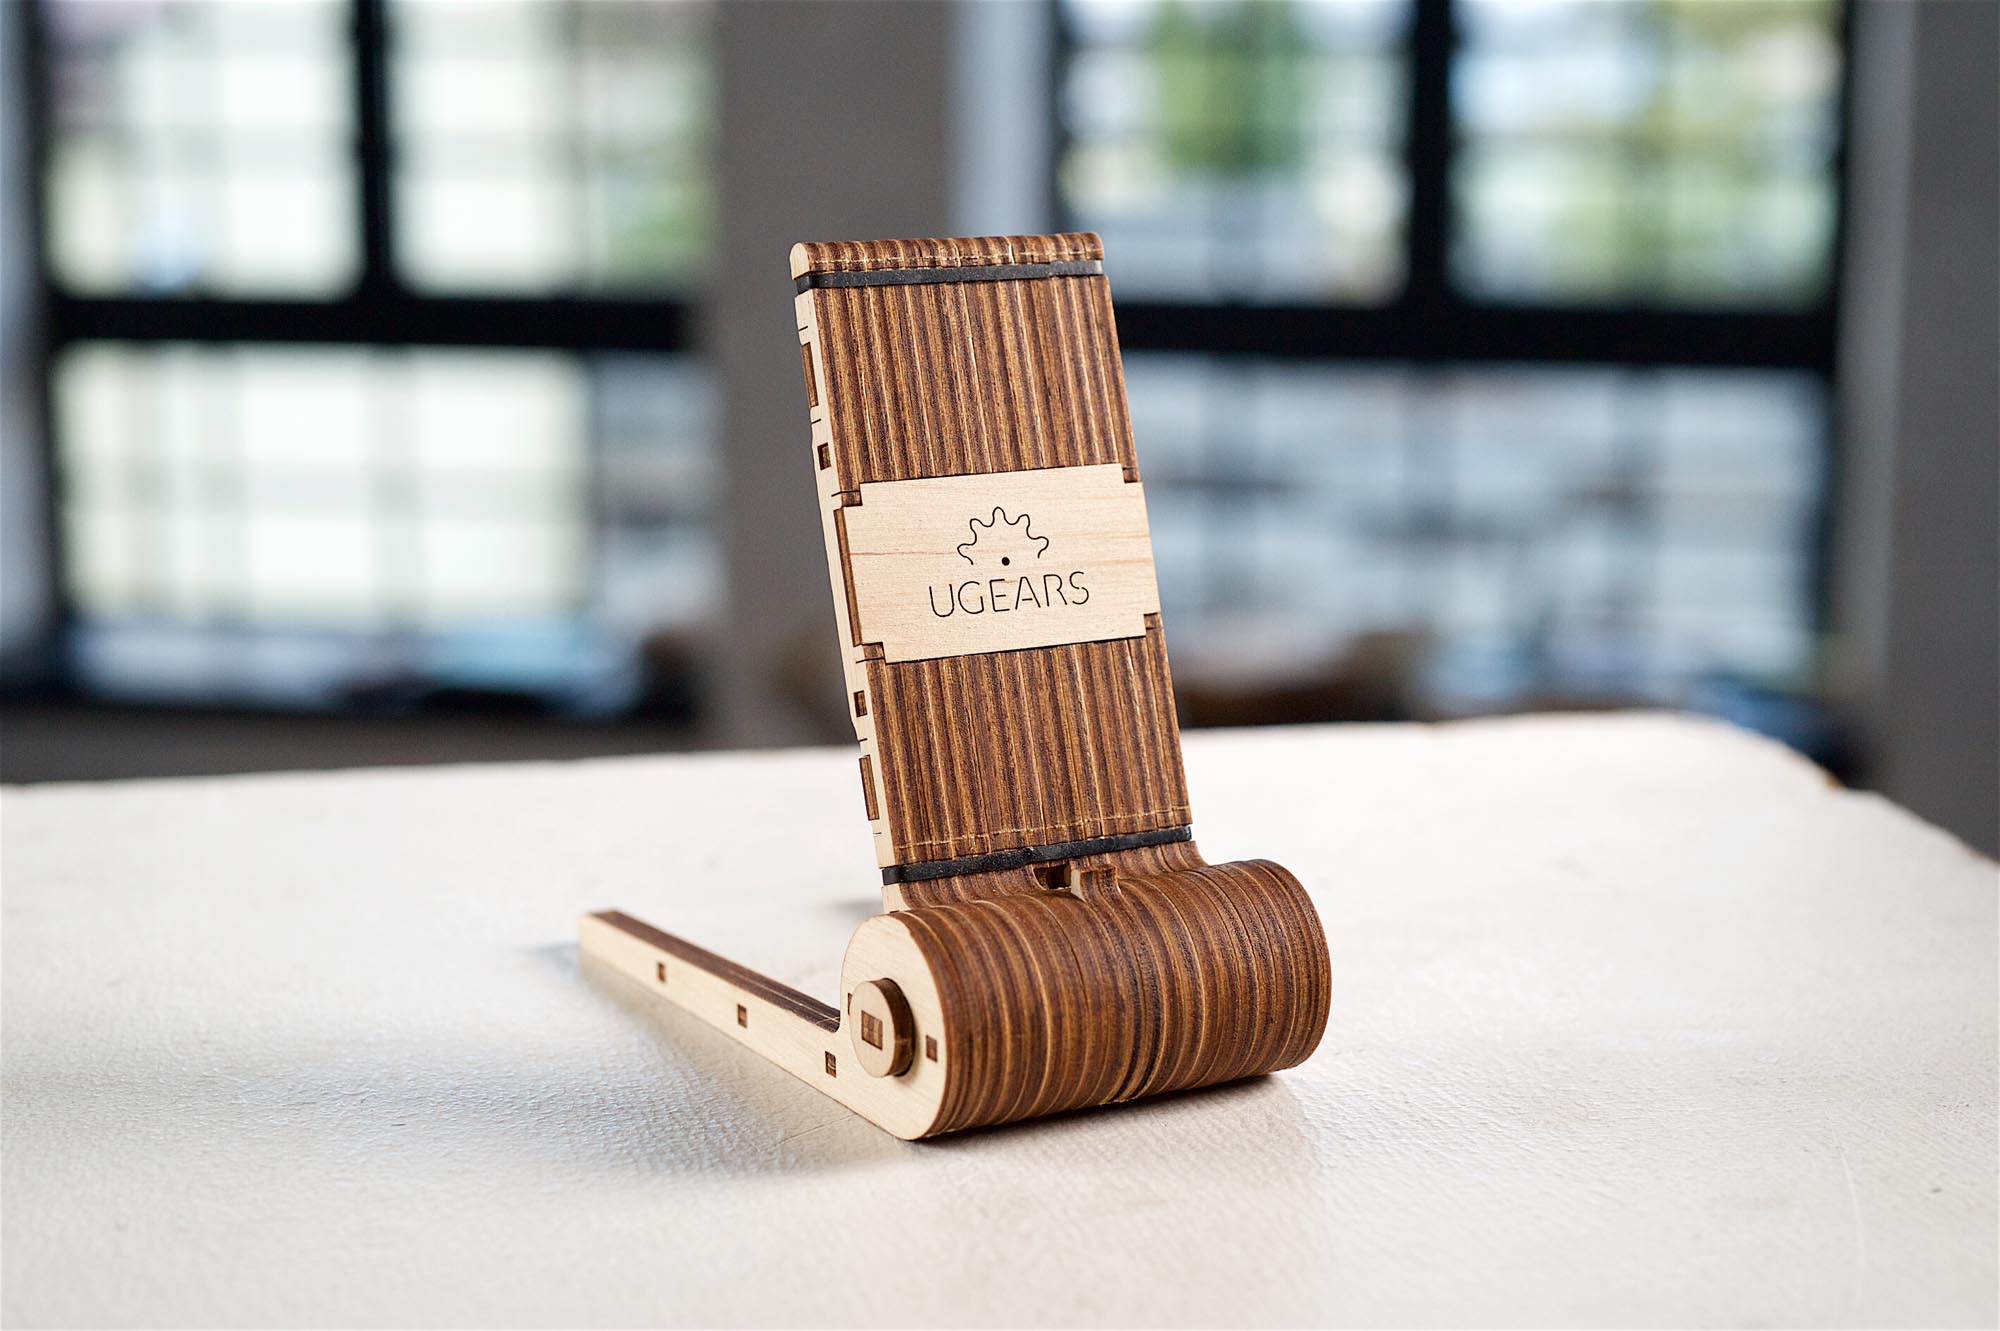 Ugears Foldable Phone Holder in India. Wooden Stand from Ugears